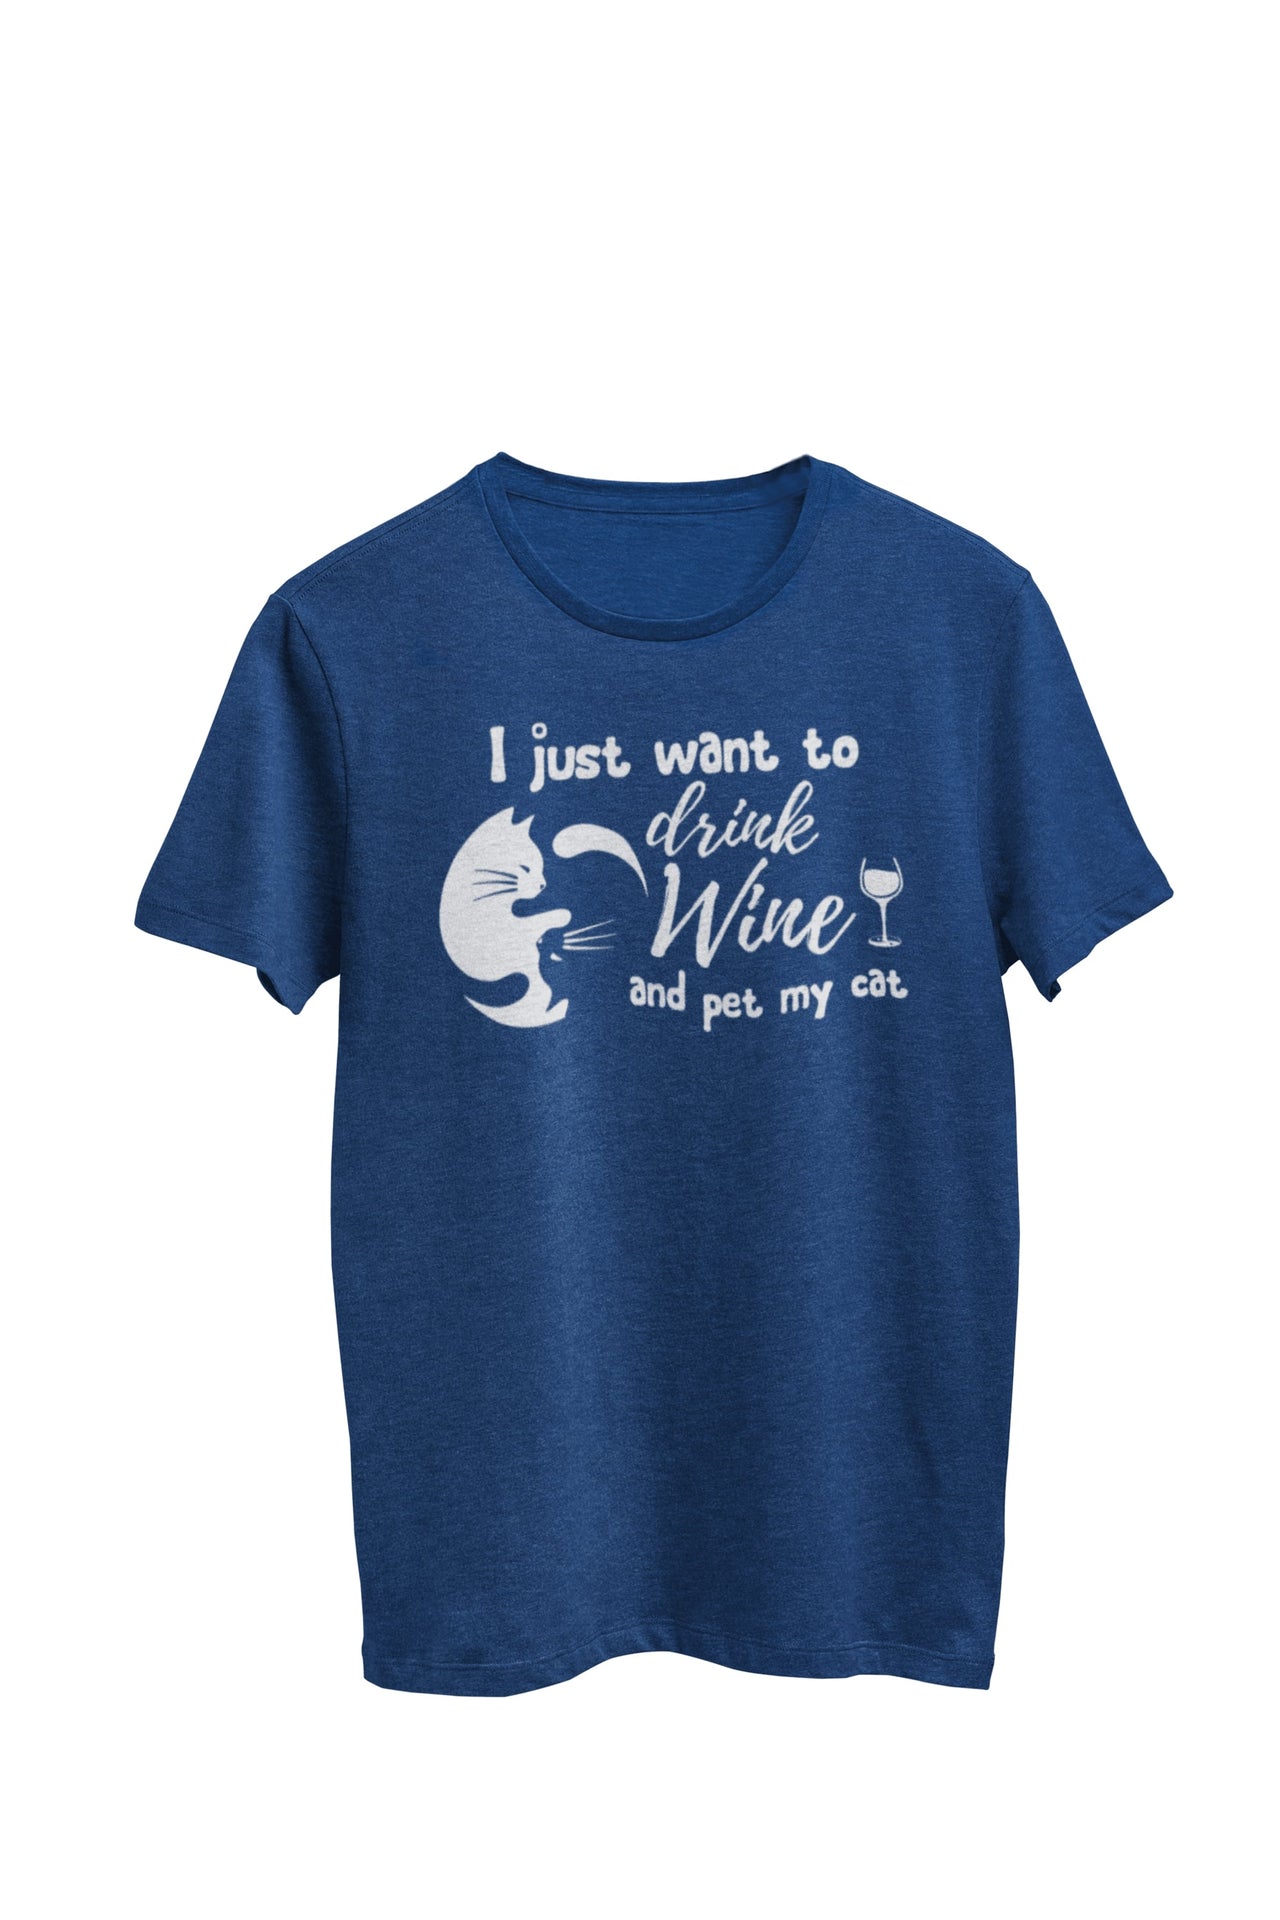 Heather Navy Unisex T-shirt featuring the text 'I just want to drink wine and pet my cat,' along with an endearing image of a cat nestled within a yin yang symbol, accompanied by a wine glass with a yin yang symbol on its stem. Designed by WooHoo Apparel